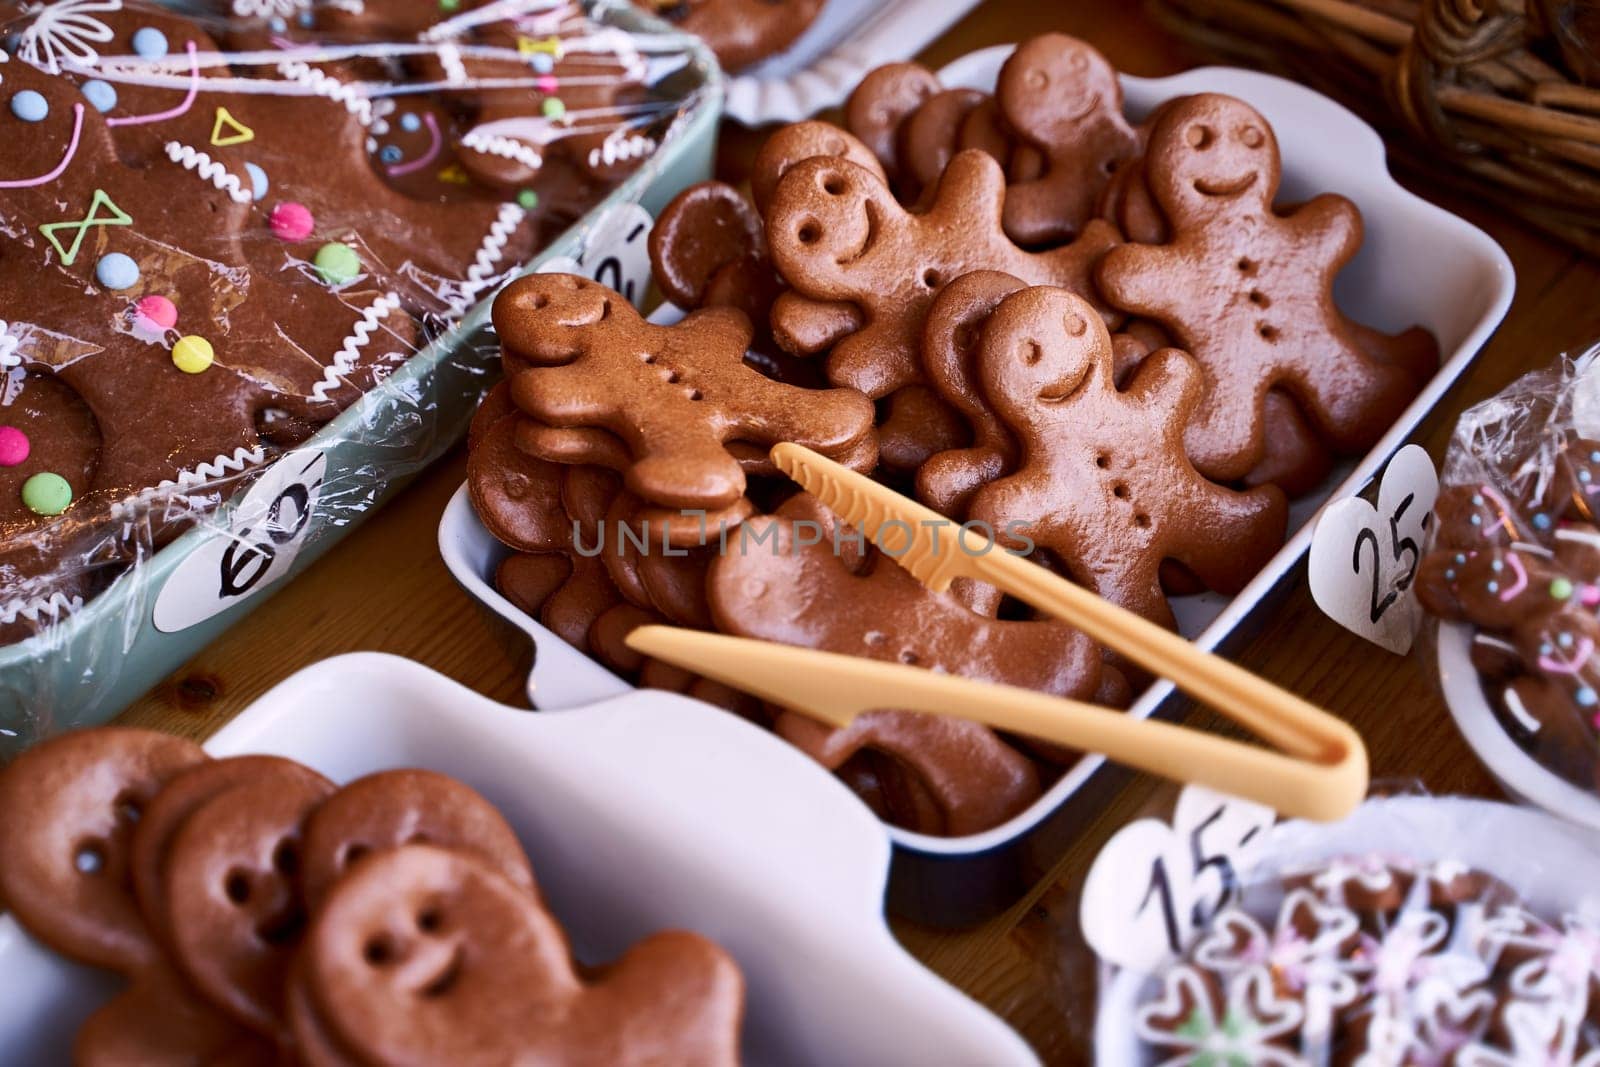 Pernicky, traditional Chezch gingerbread man cookies